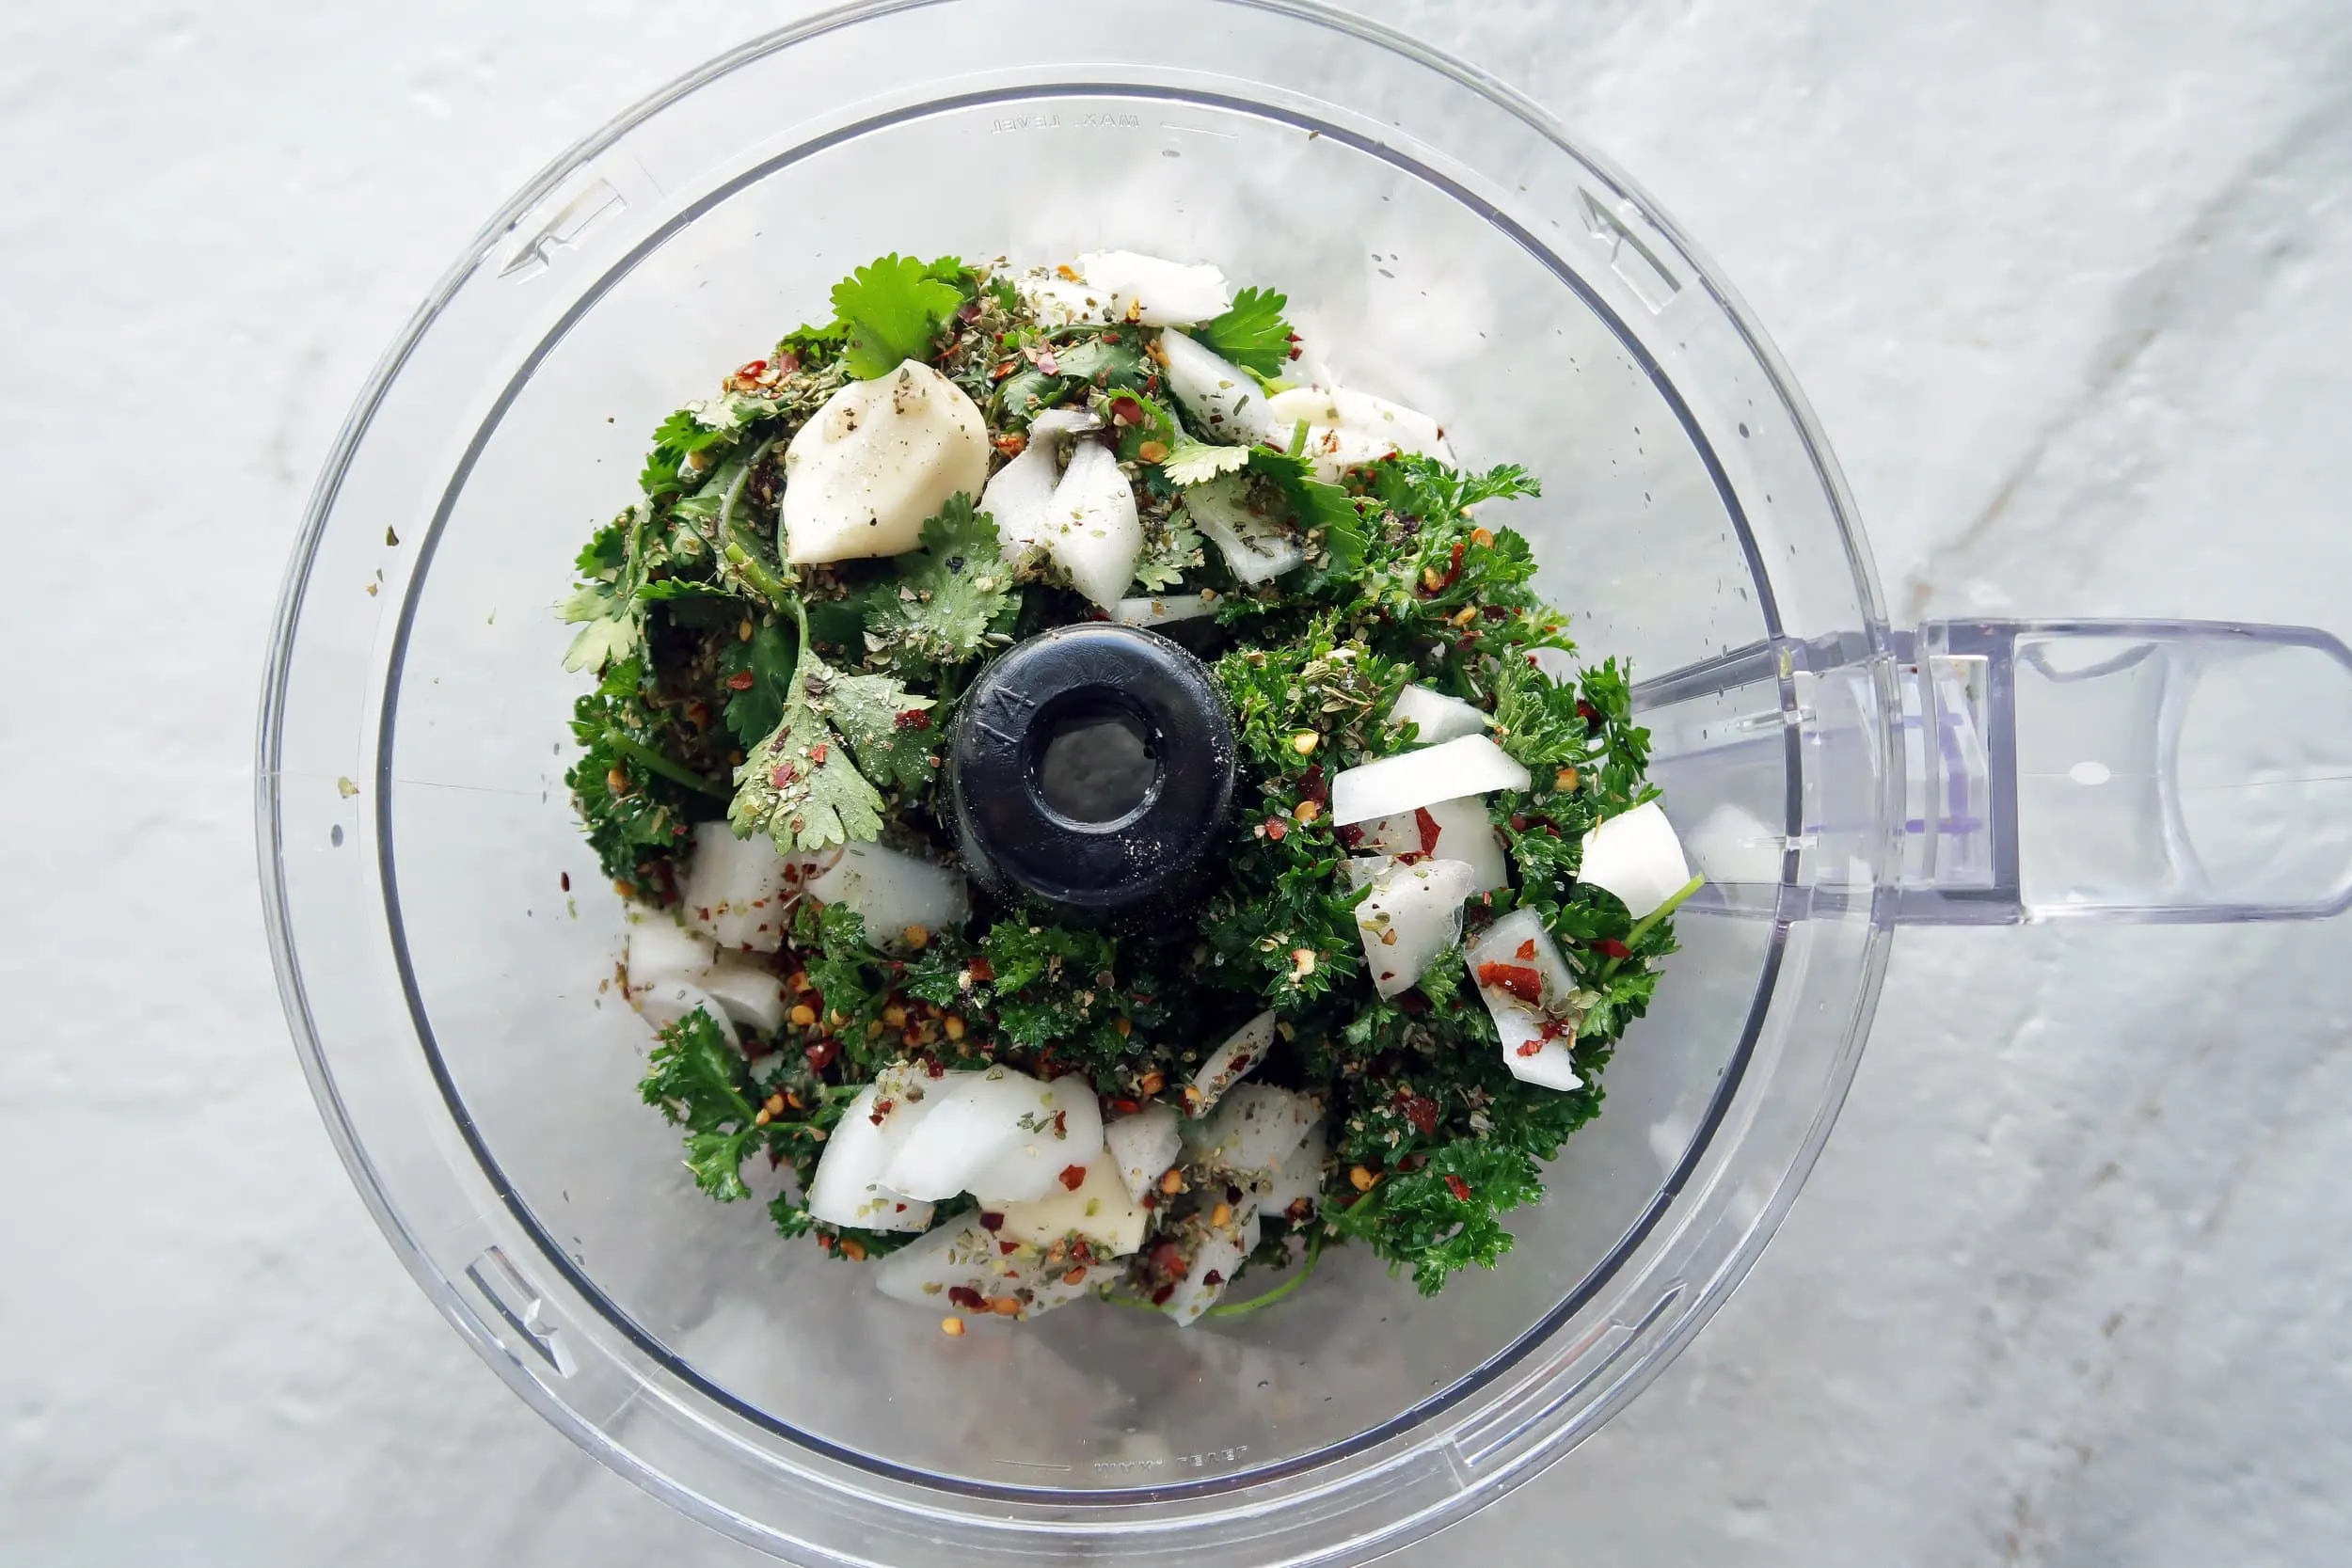 A food processor containing chimichurri sauce ingredients including parsley, garlic, and onion.